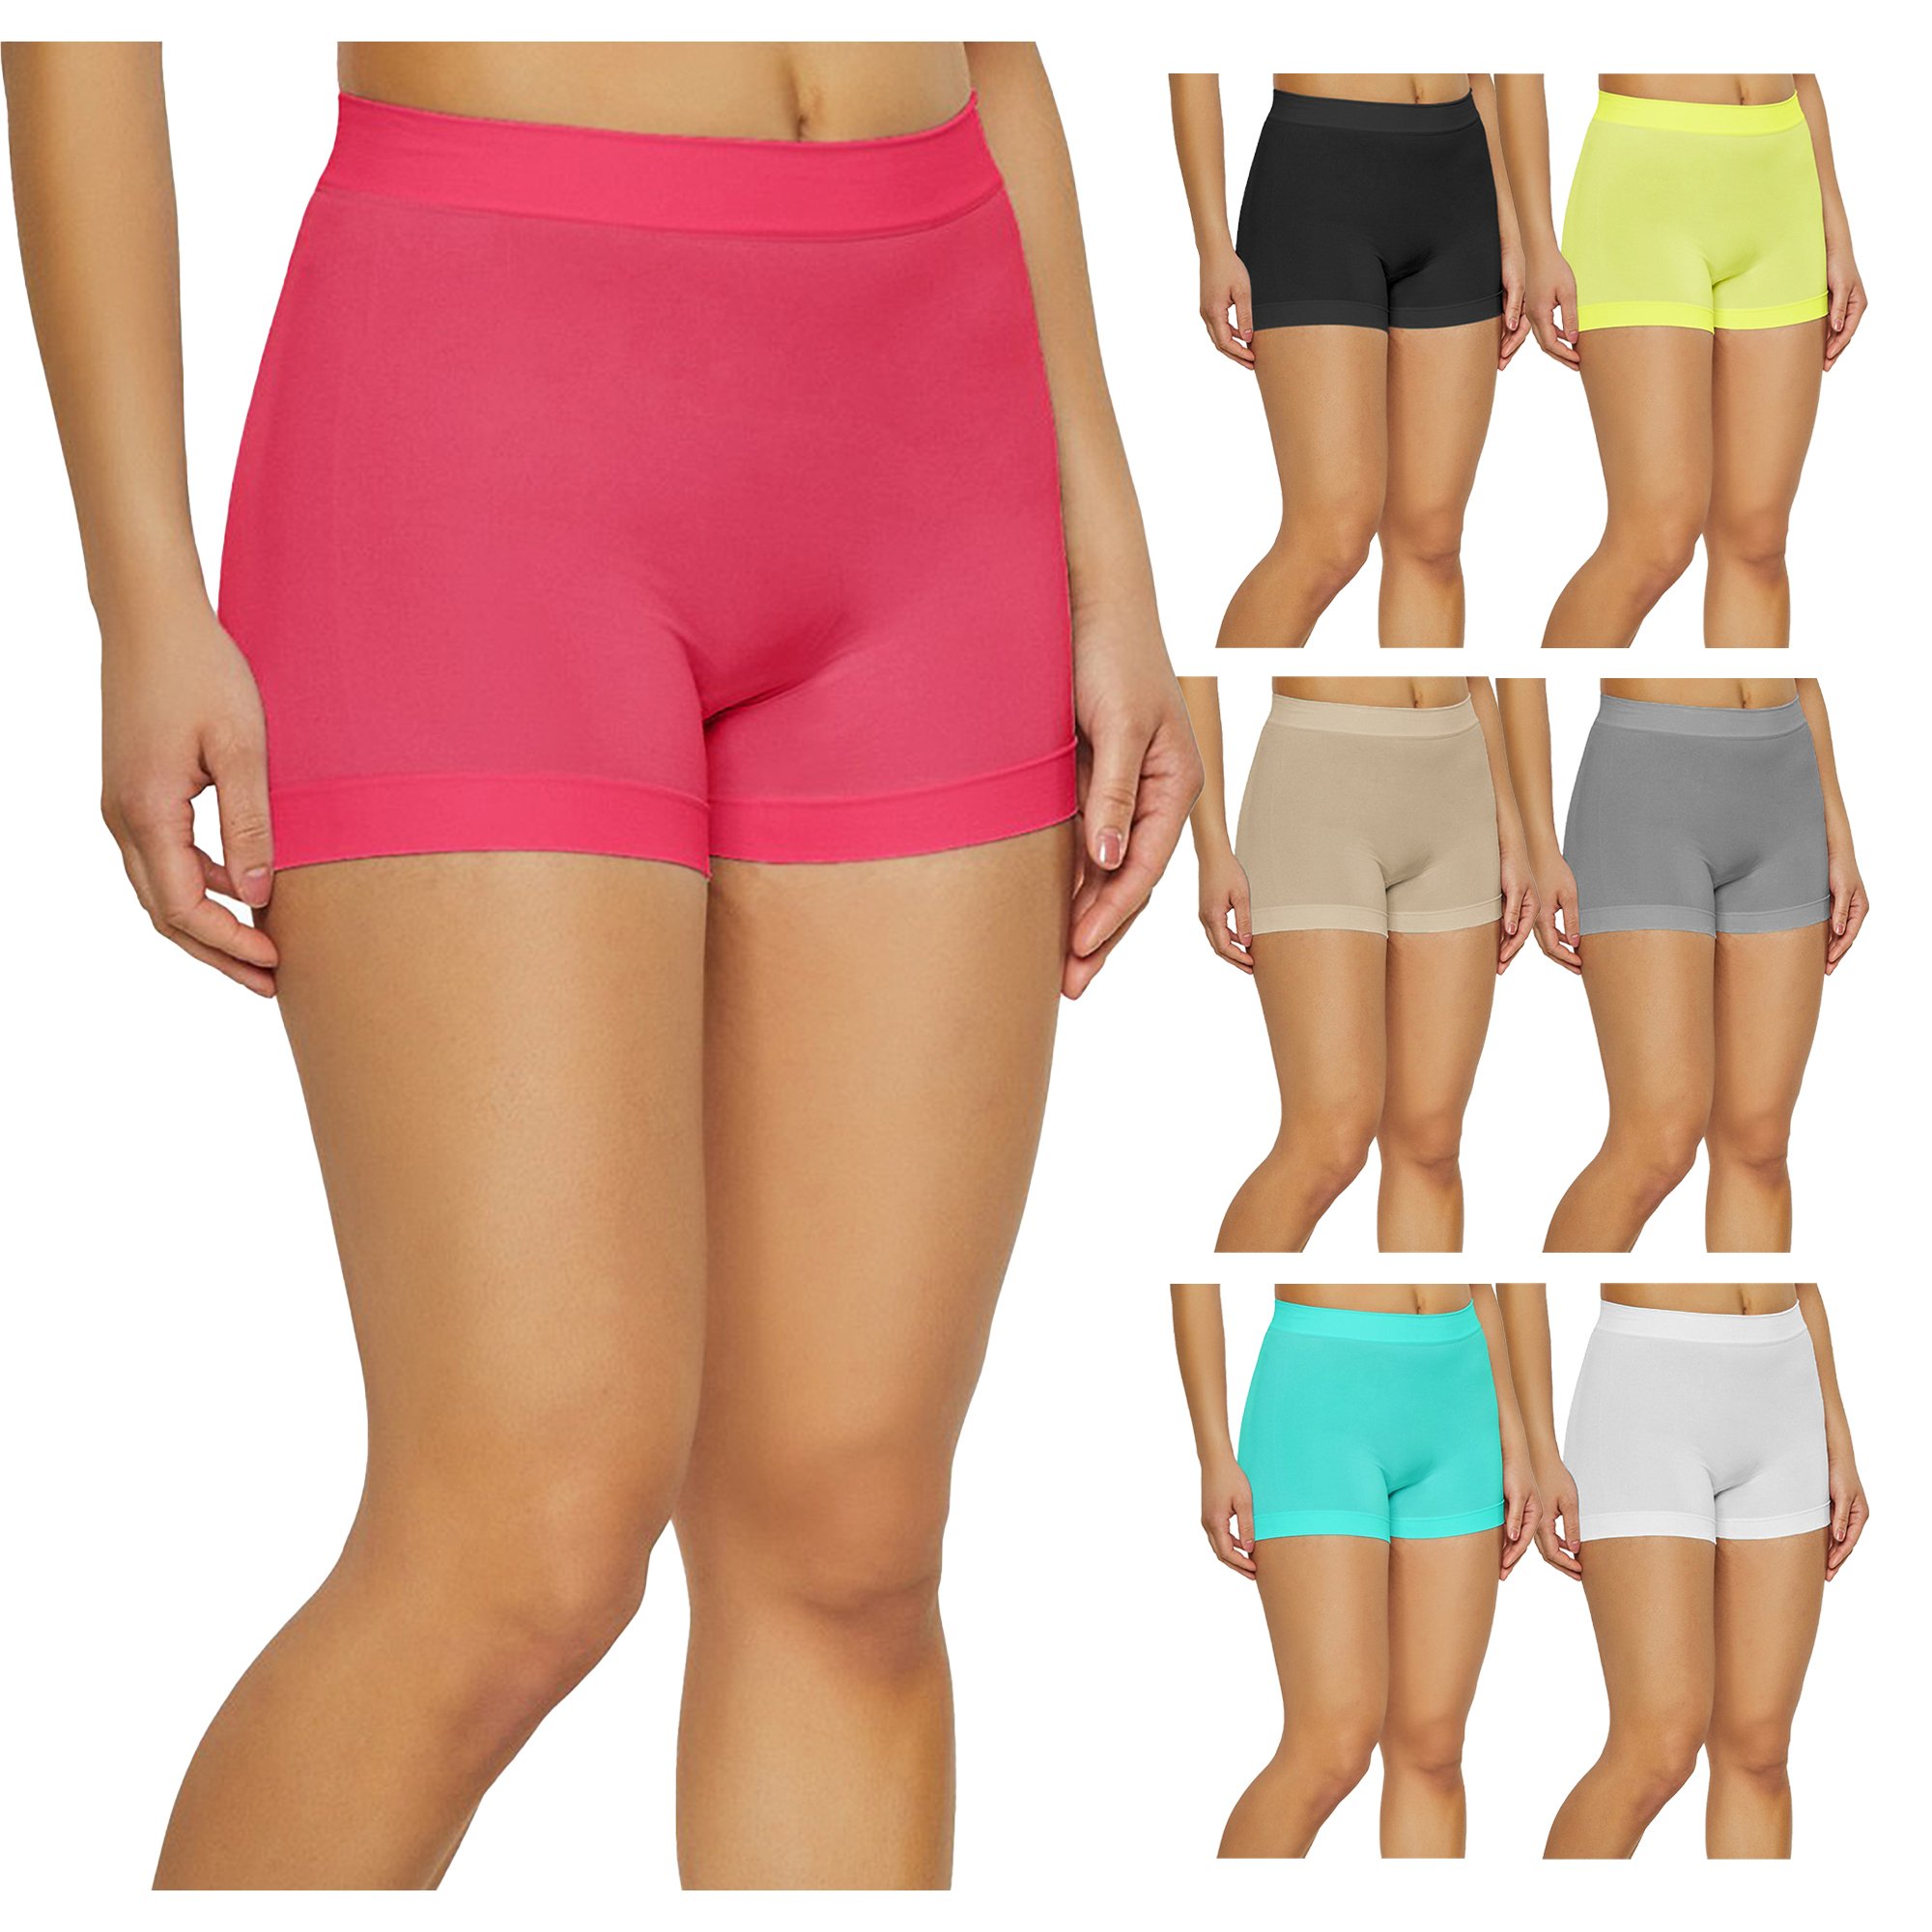 12-Pack Women's High Waisted Biker Bottom Shorts For Yoga Gym Running Ladies Pants - TEAL, XS